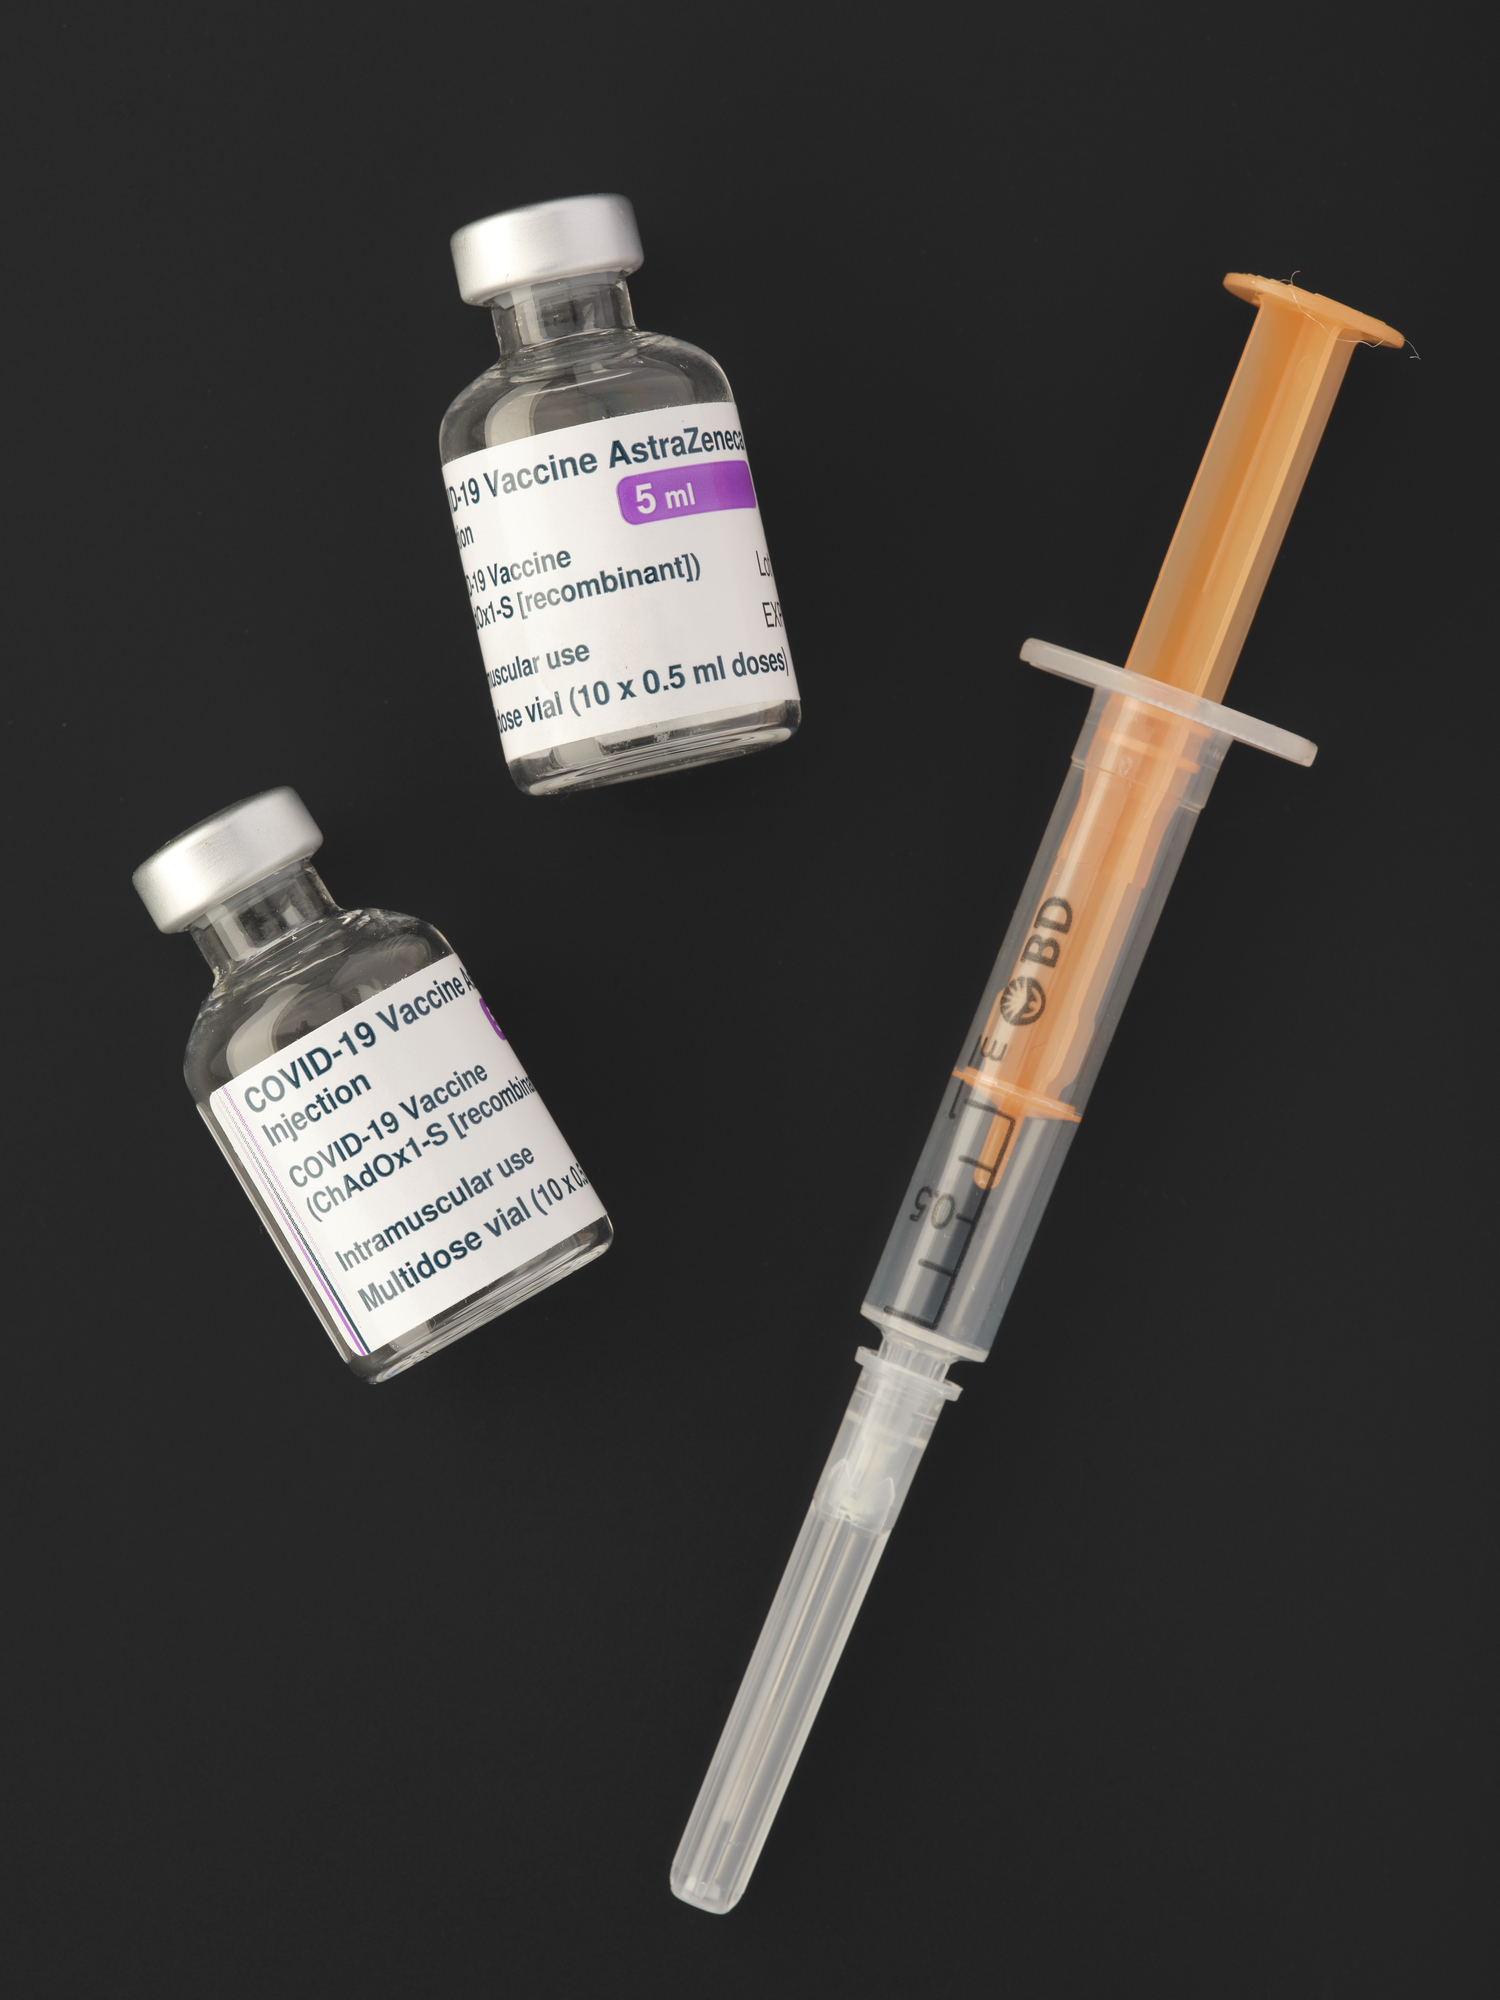 COVID-19 AstraZeneca vaccine and syringe for vaccination .T.2021.12. The AstraZeneca COVID-19 vaccine was developed by the University of Oxford and the pharmaceutical company, AstraZeneca. The vaccine was developed by building on existing research into a vaccine for MERS was approved for use in the UK on 30 December 2020. Now over 2 billion doses of the vaccine have been administered across the globe. 